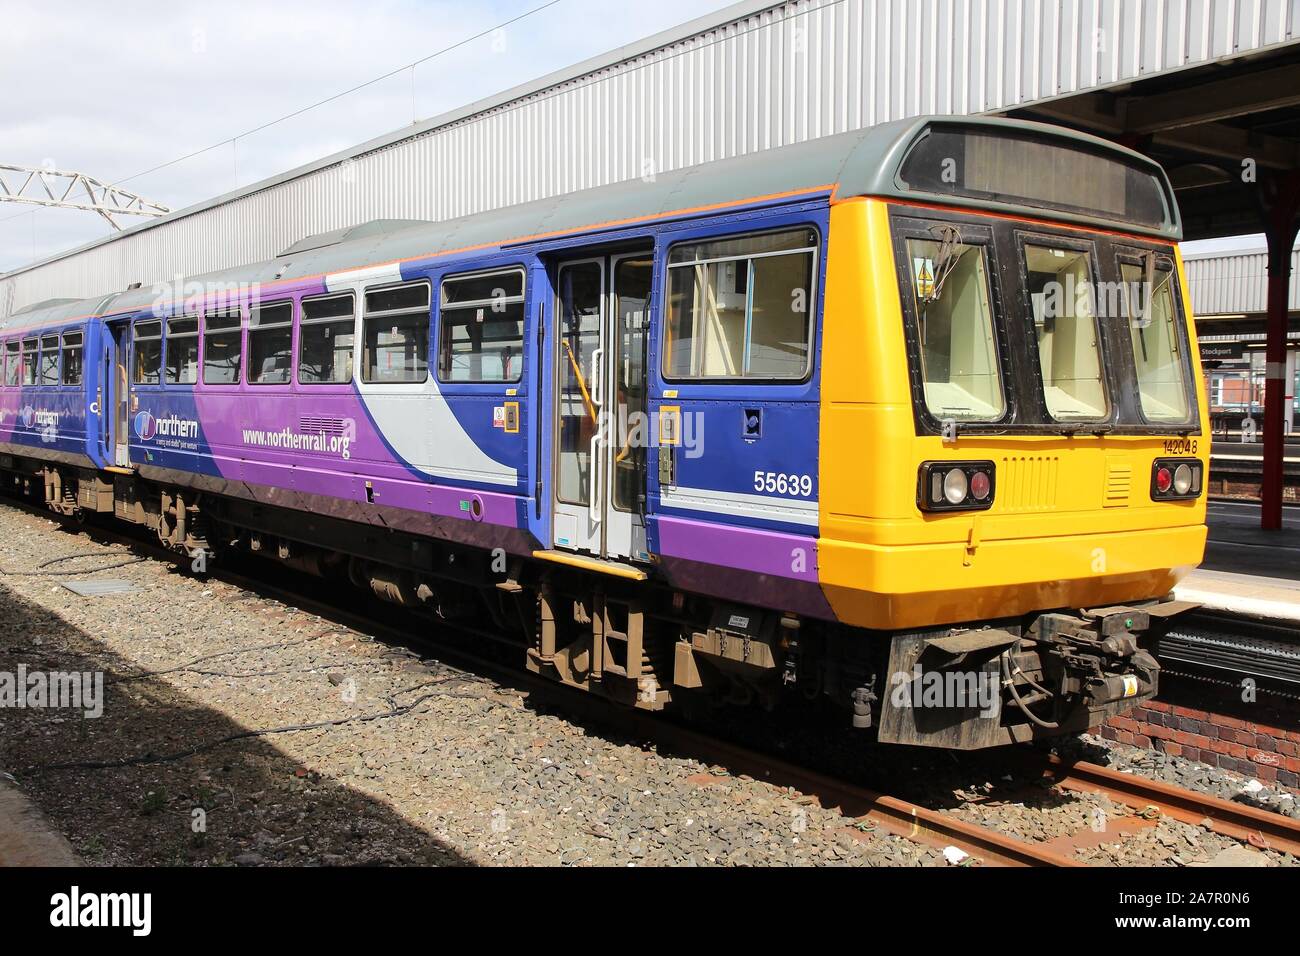 STOCKPORT, UK - APRIL 23, 2013: Northern Rail train in Stockport, UK. NR is part of Serco-Abellio joint venture. NR has fleet of 313 trains and calls Stock Photo